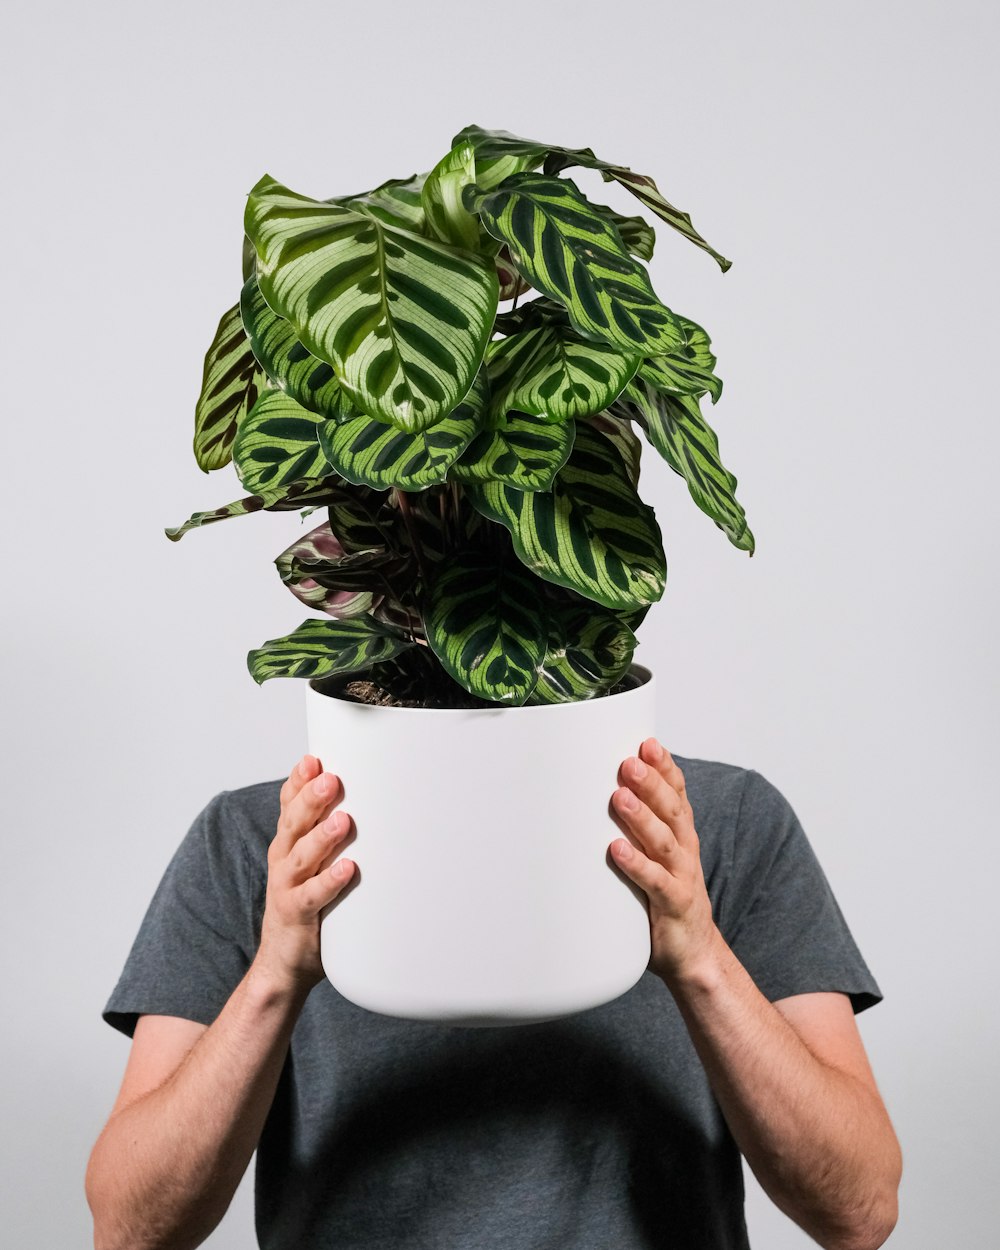 person holding green plant in white pot